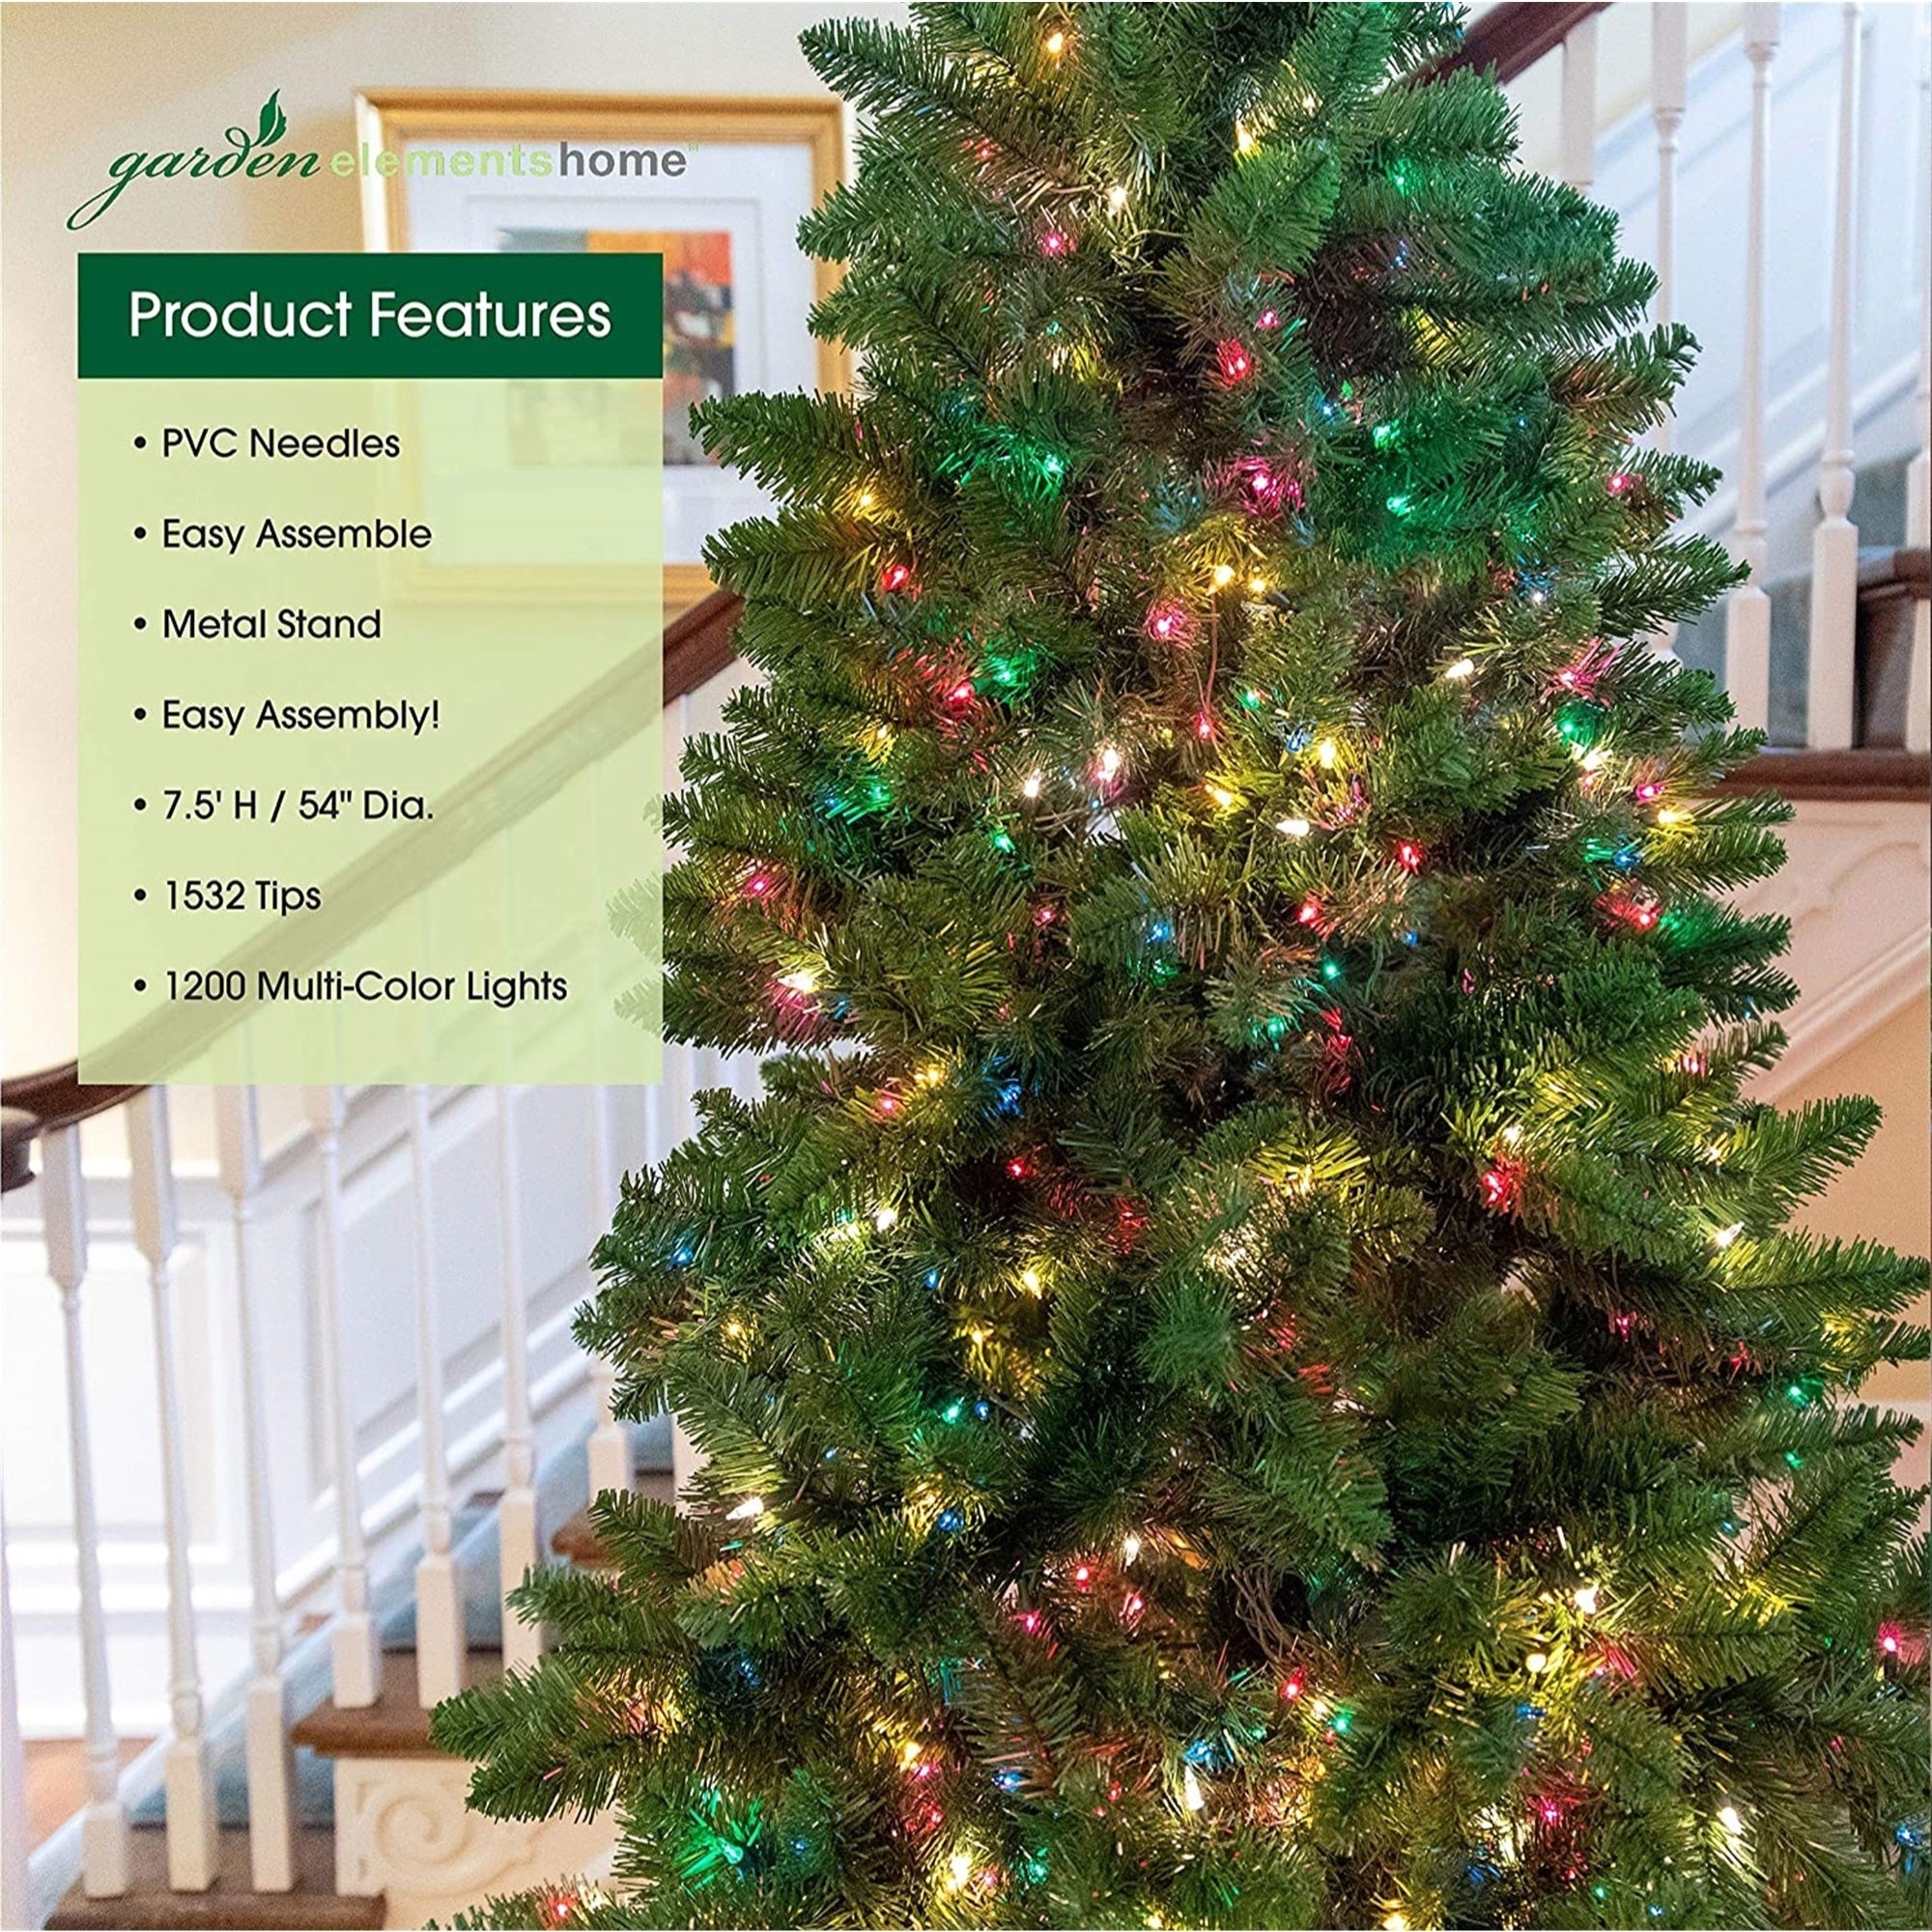 Garden Elements Artificial Pre-Lit Penn Spruce Christmas Tree, 1532 Tips, 1200 Multi-Colored Lights, 7.5 ft